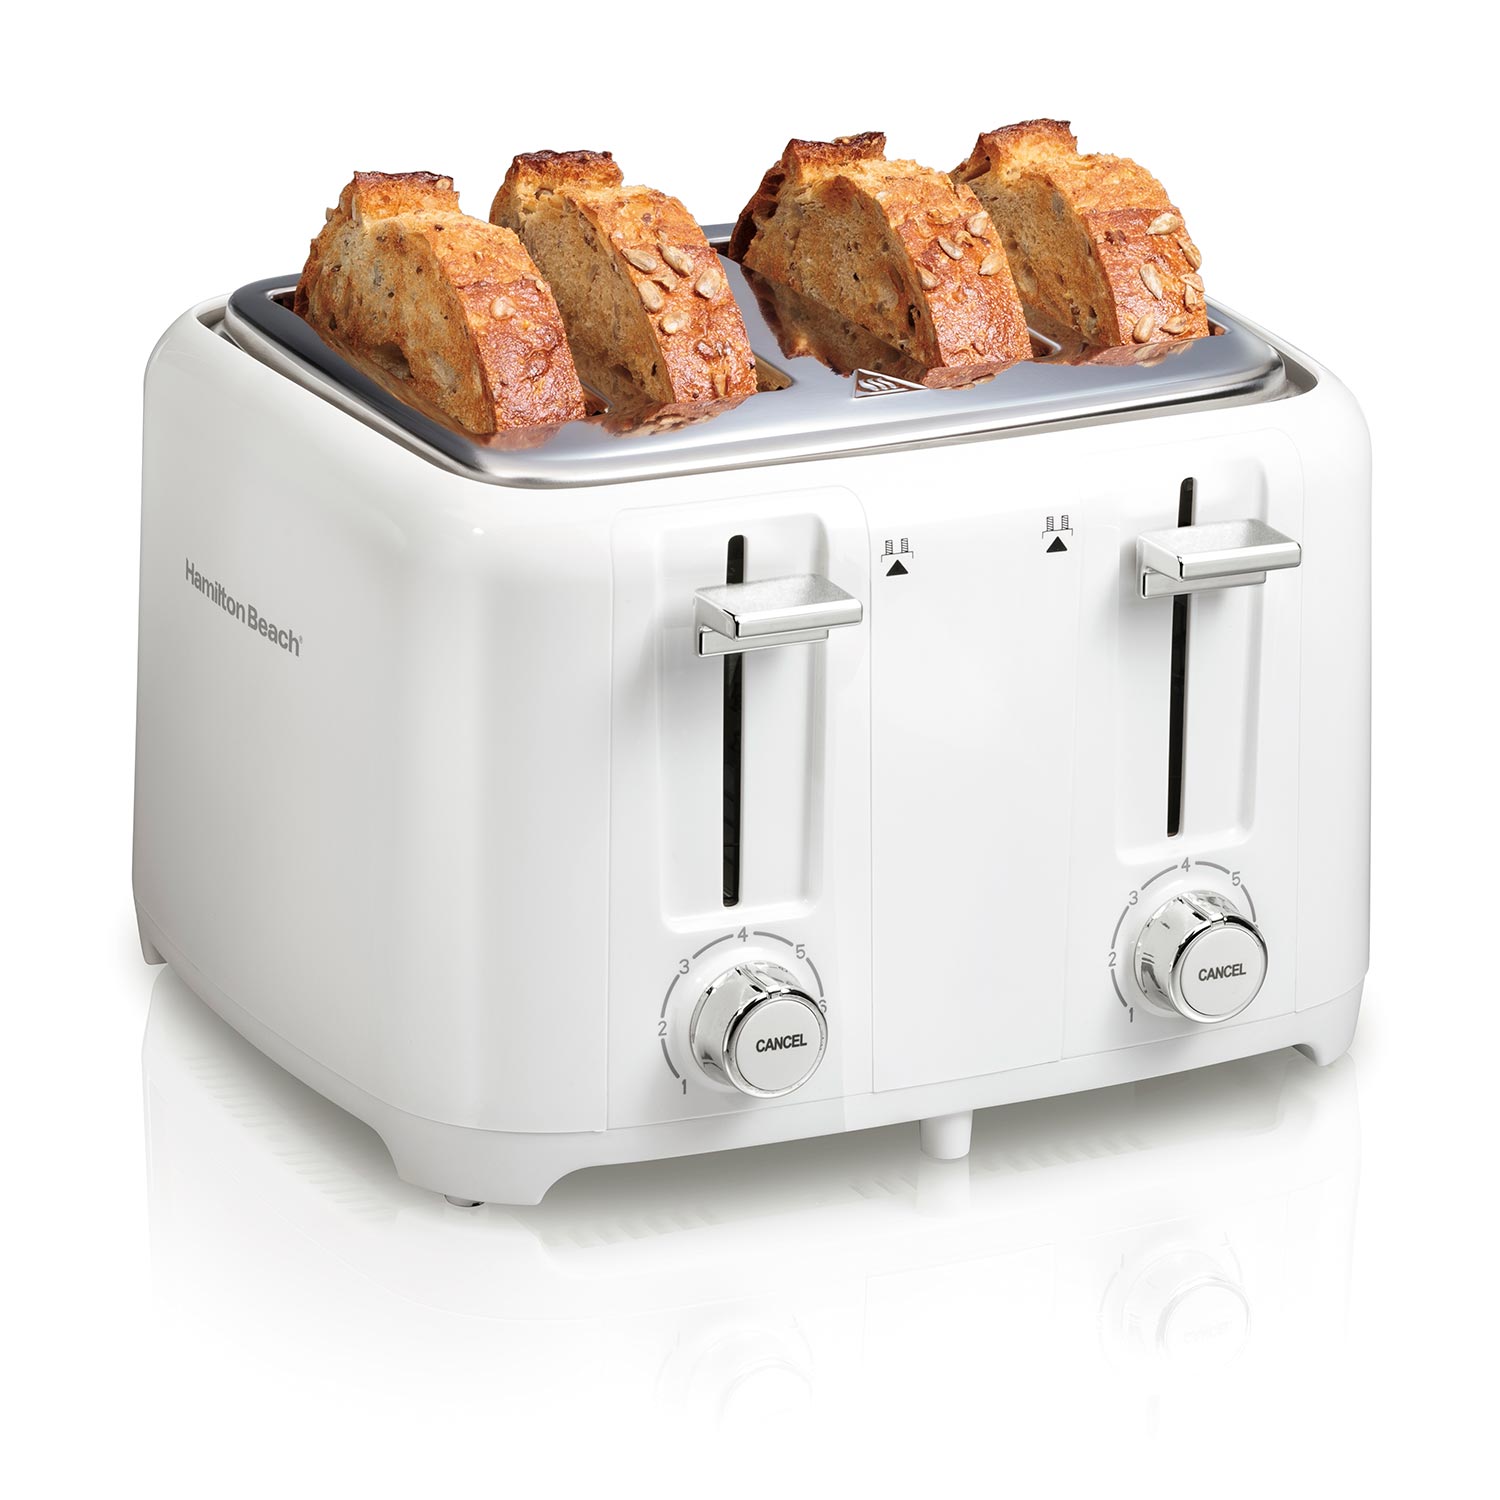 4 Slice Toaster with Extra-Wide Slots, White (24218)